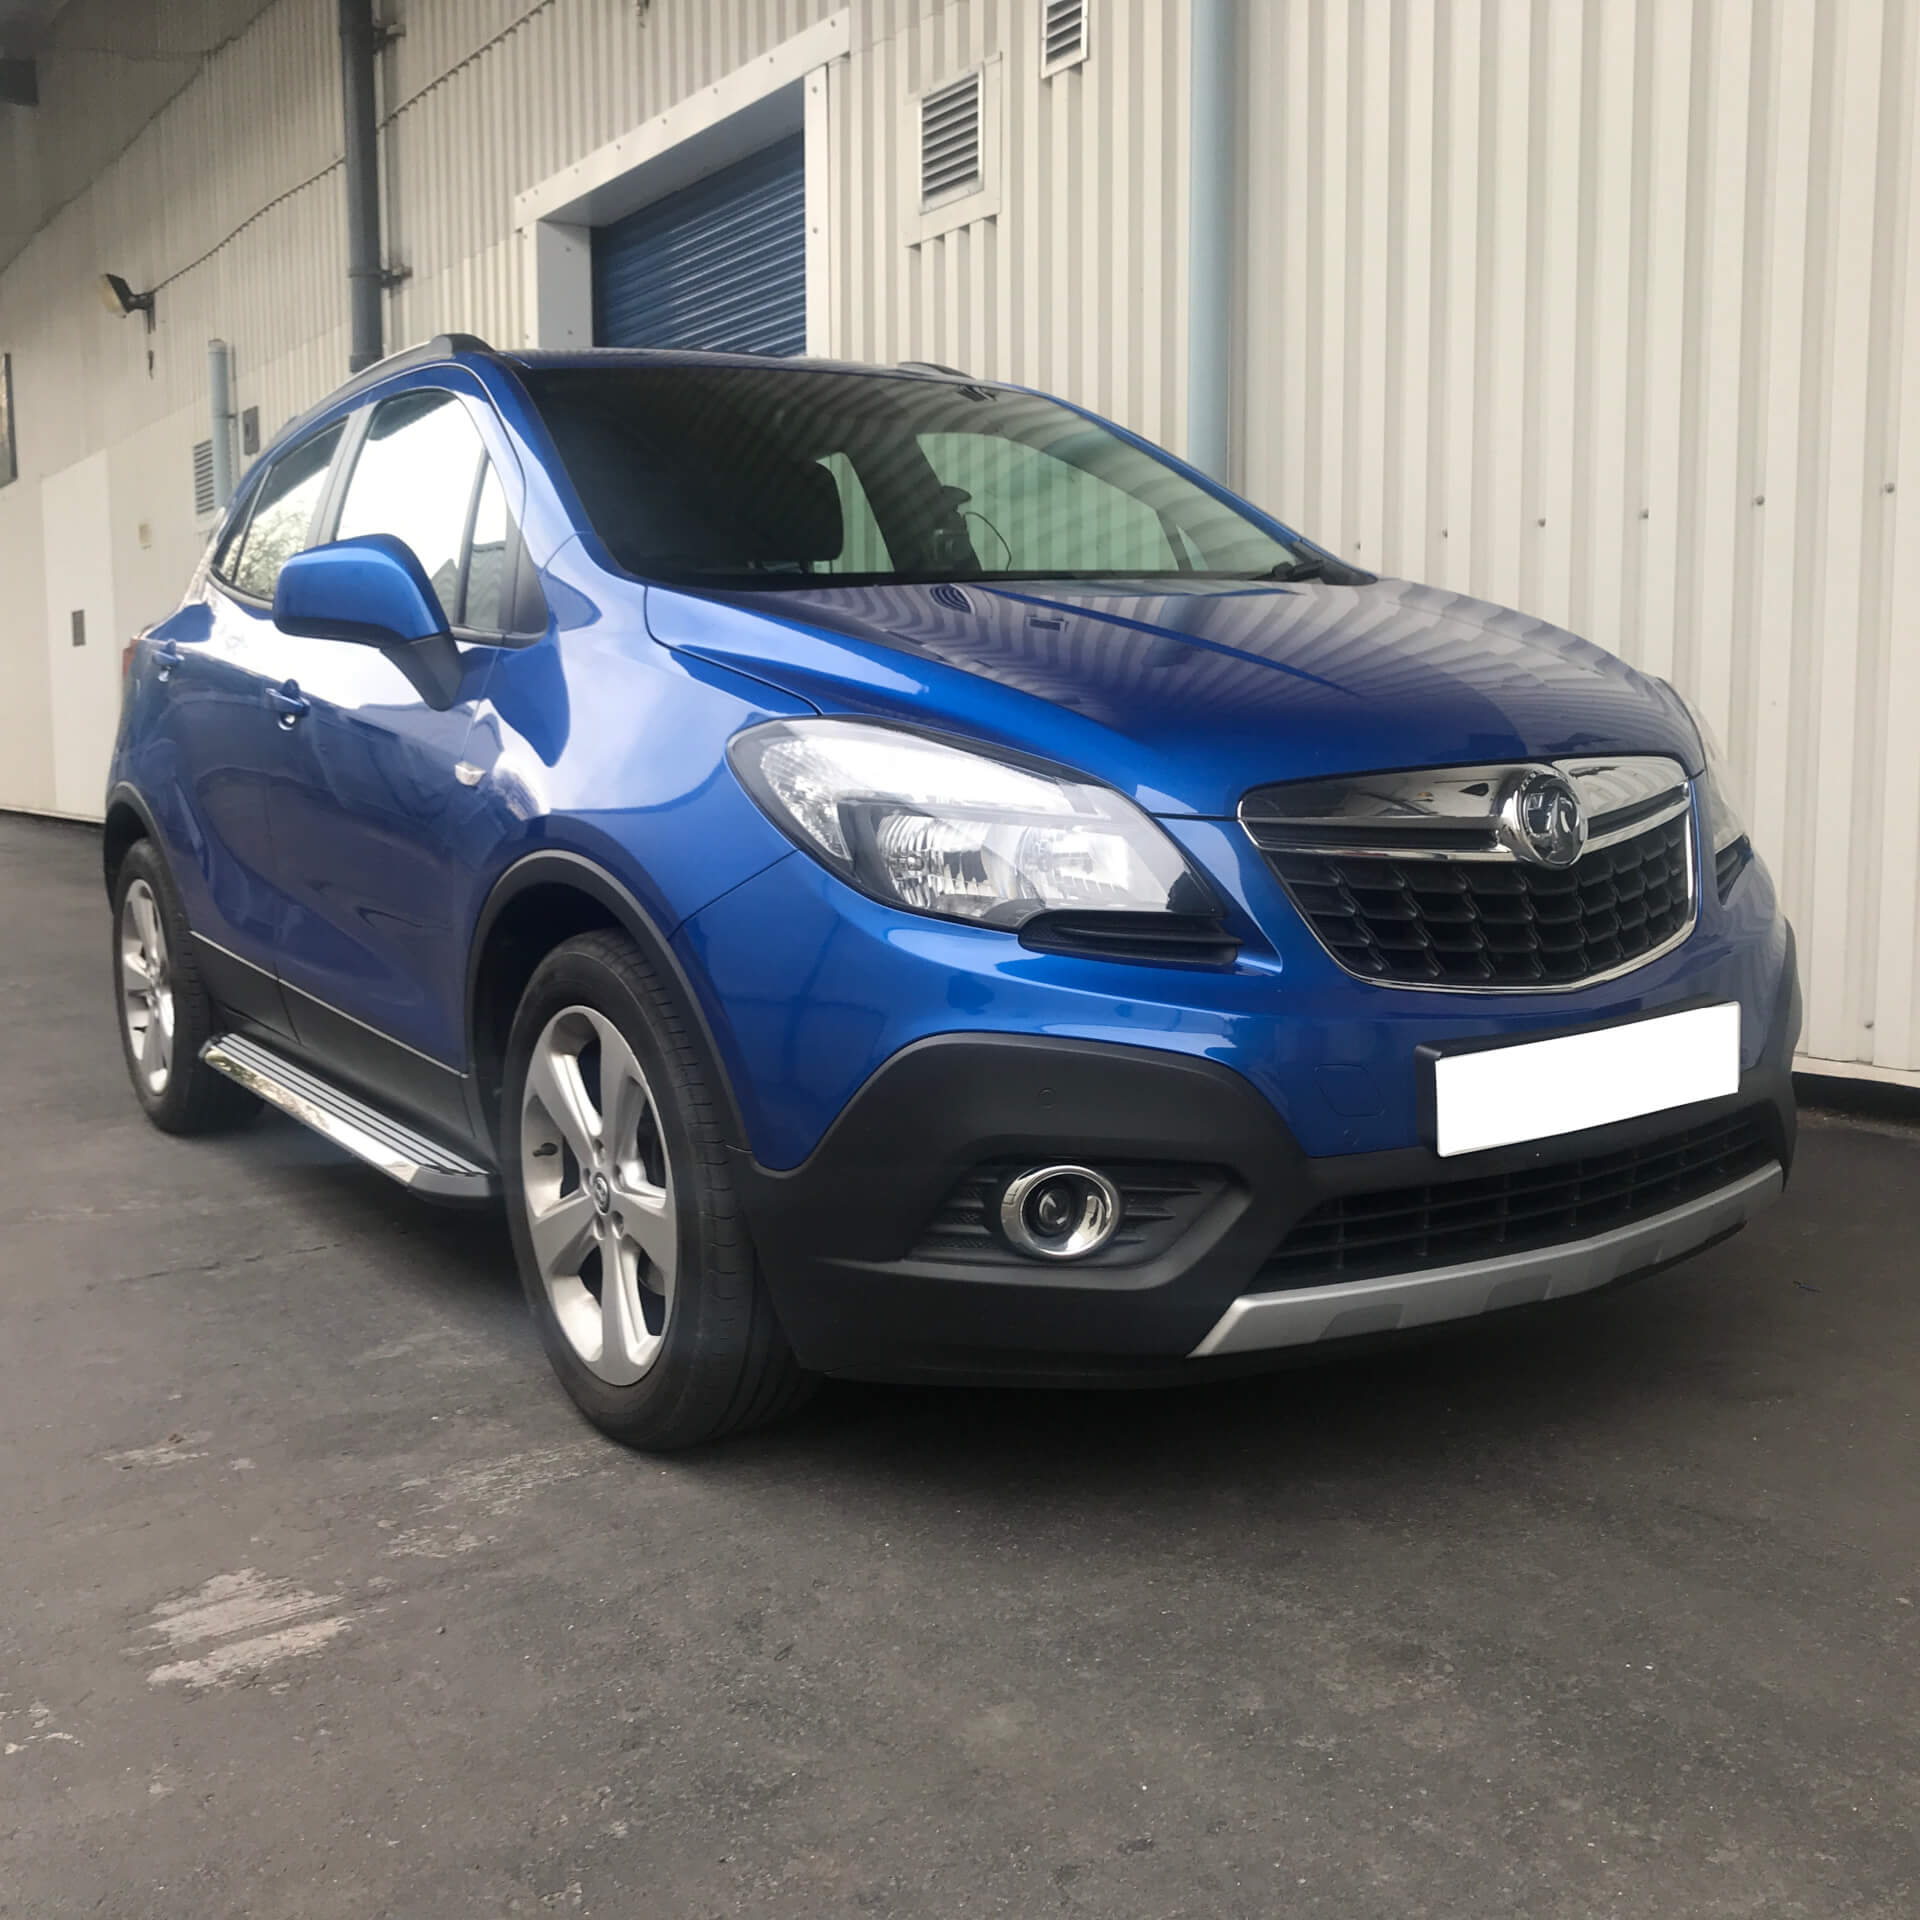 Direct4x4 accessories for Vauxhall Mokka vehicles with a photo of a blue Vauxhall Mokka parked outside our depot fitted with side steps